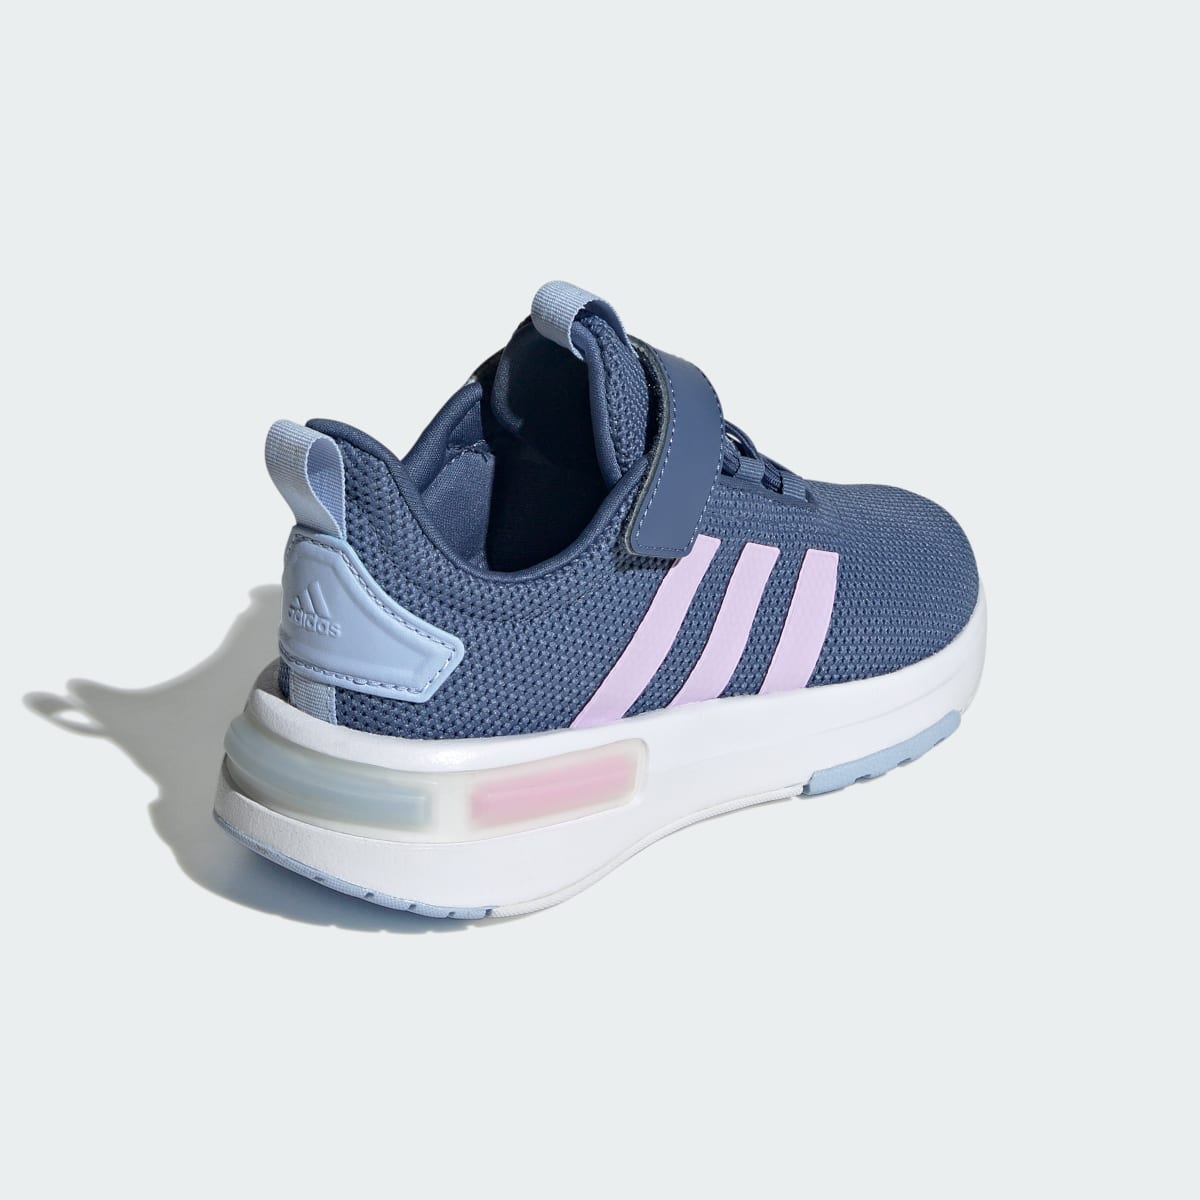 Adidas Racer TR23 Shoes Kids. 6